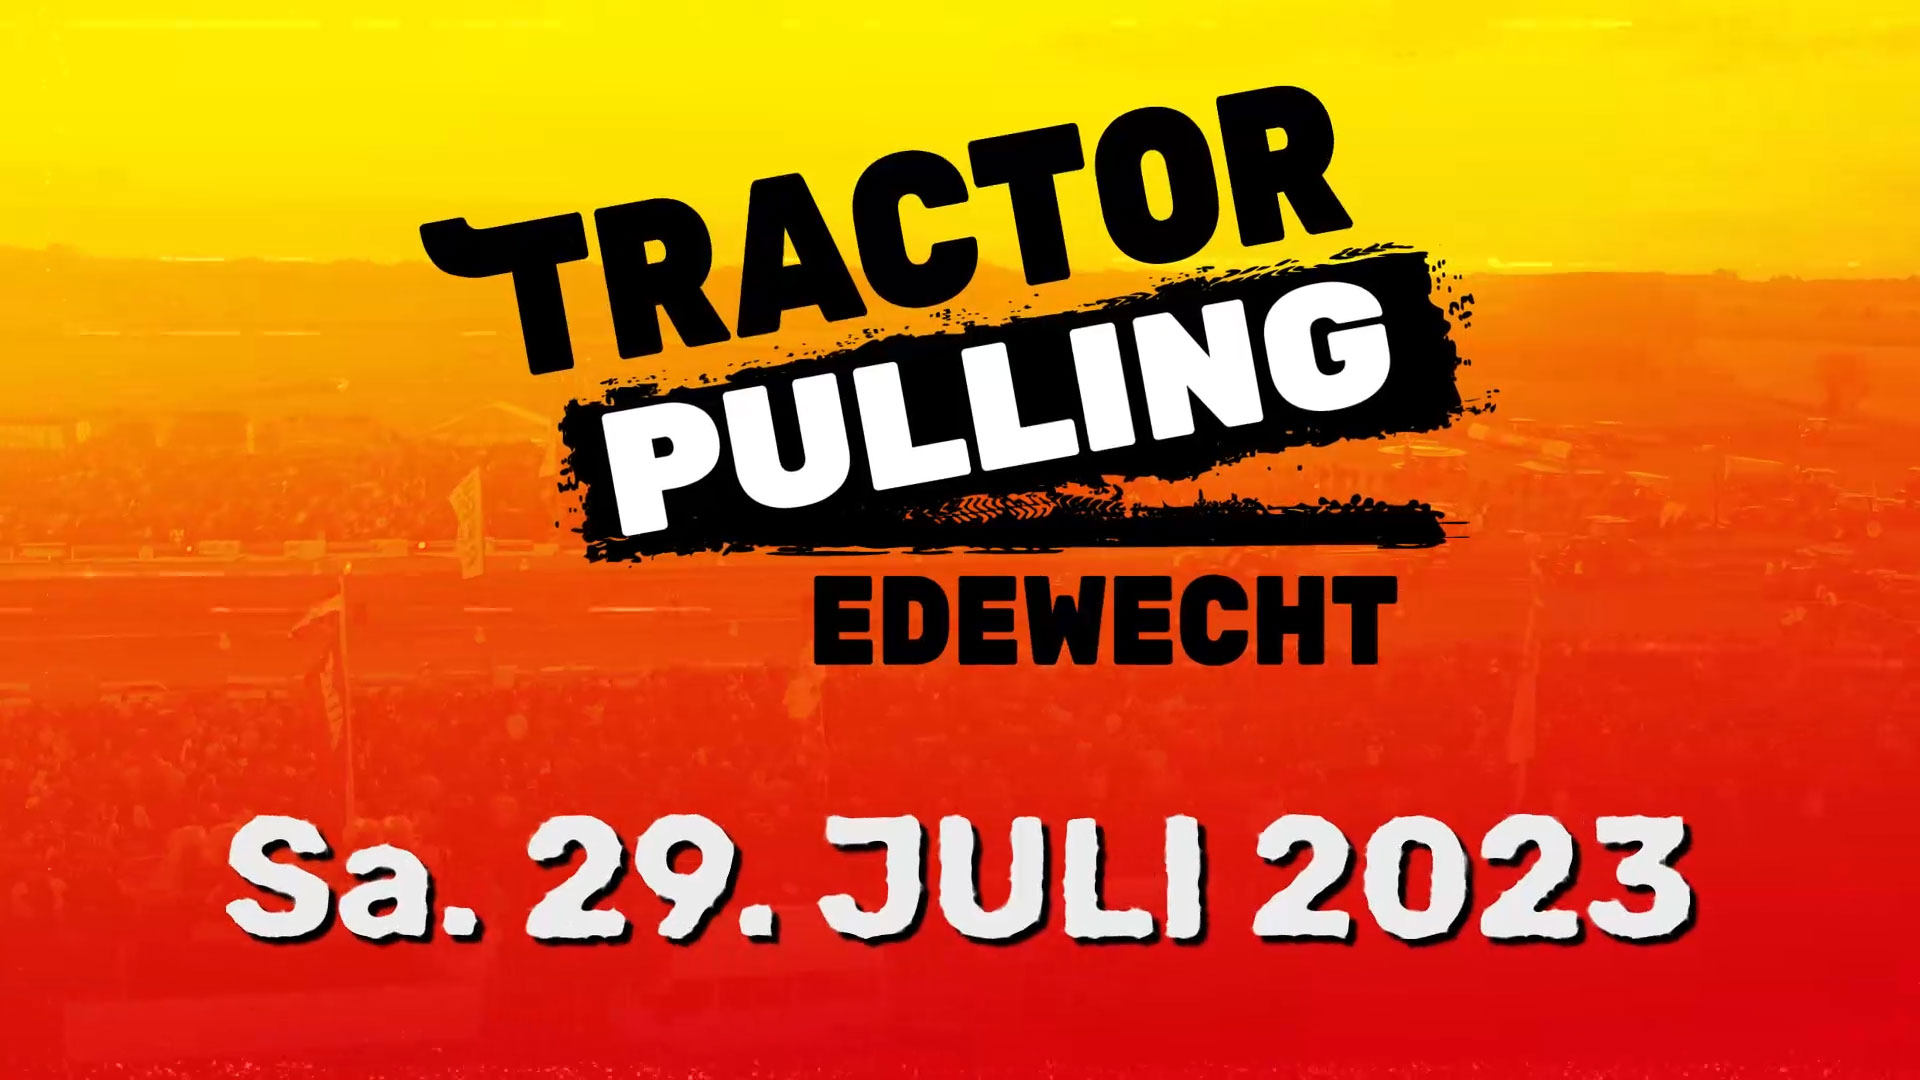 Pulling — Edewecht Tractor is enough! Pull not Full